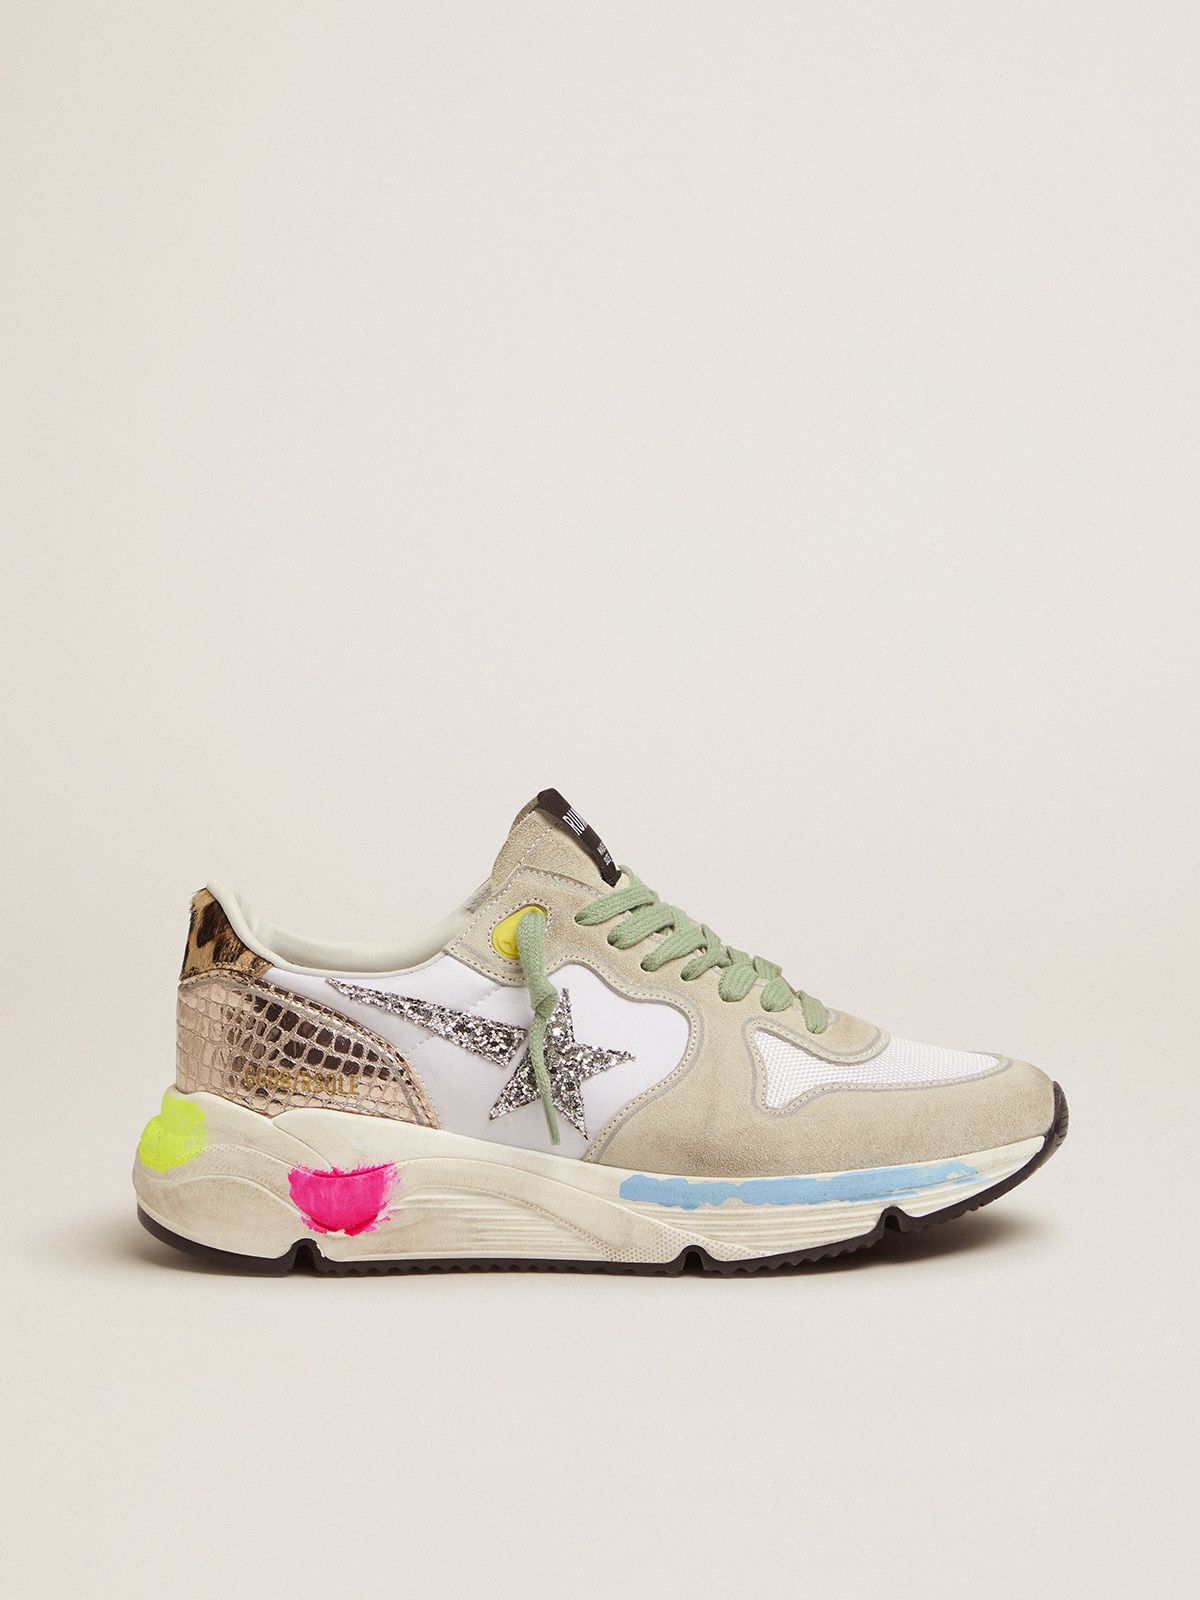 golden goose sneakers leopard in with print suede glitter and Running Sole